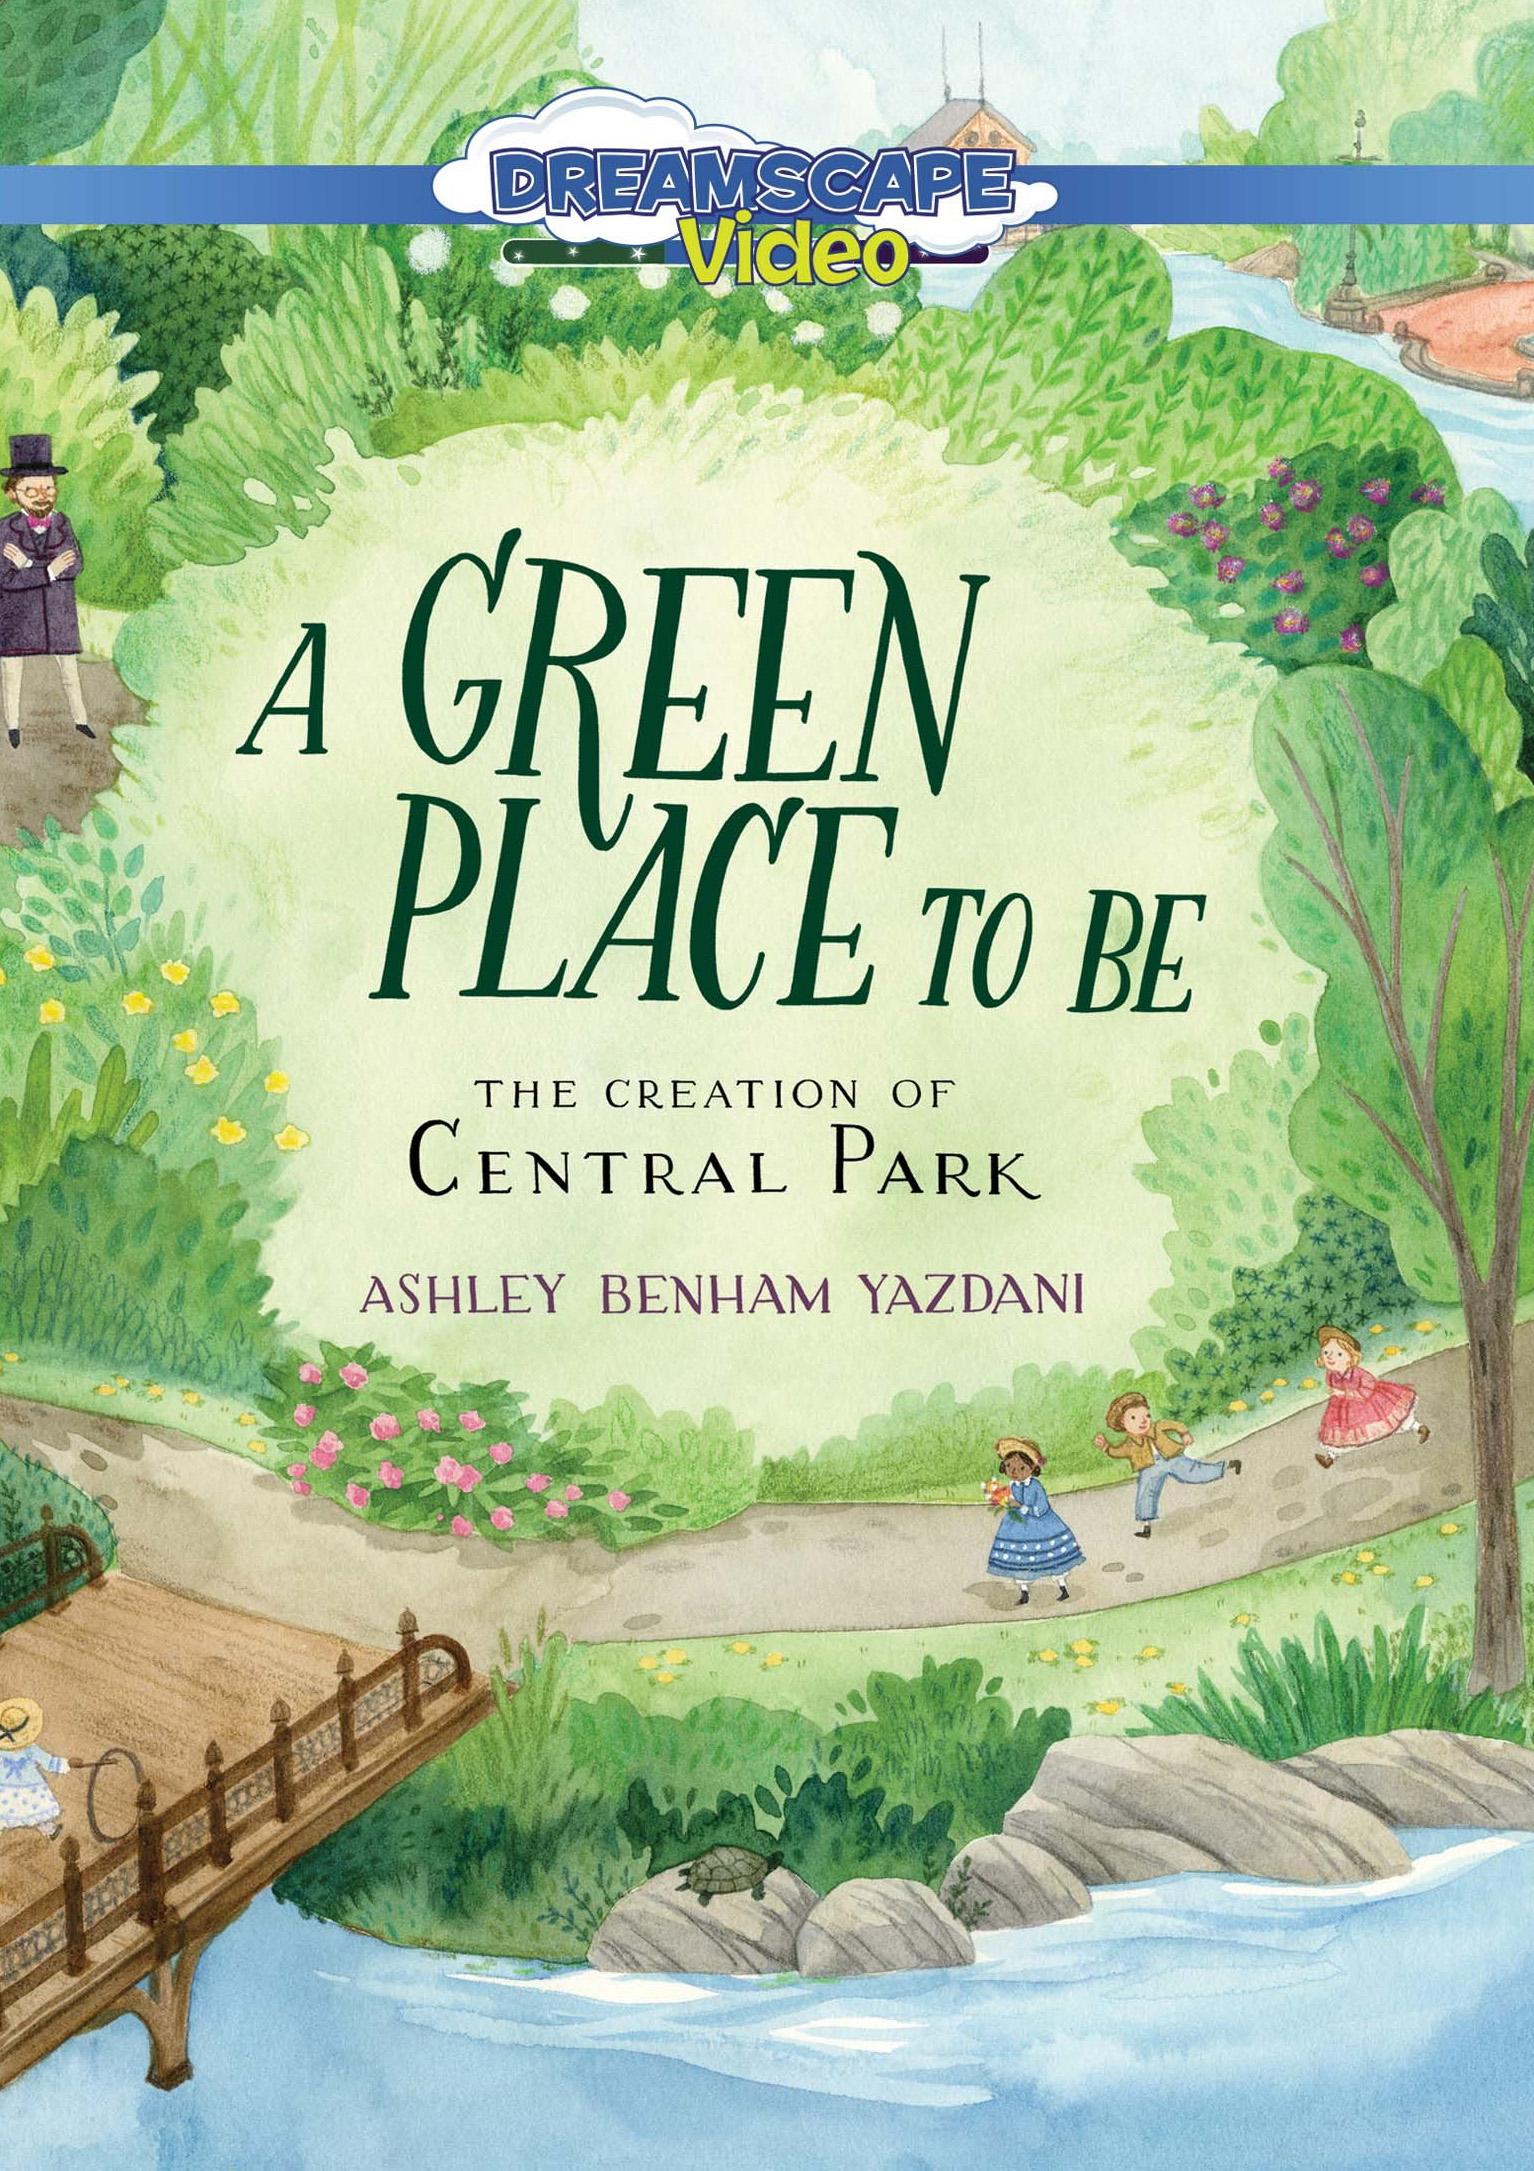 Image for "A Green Place to Be: the creation of Central Park"